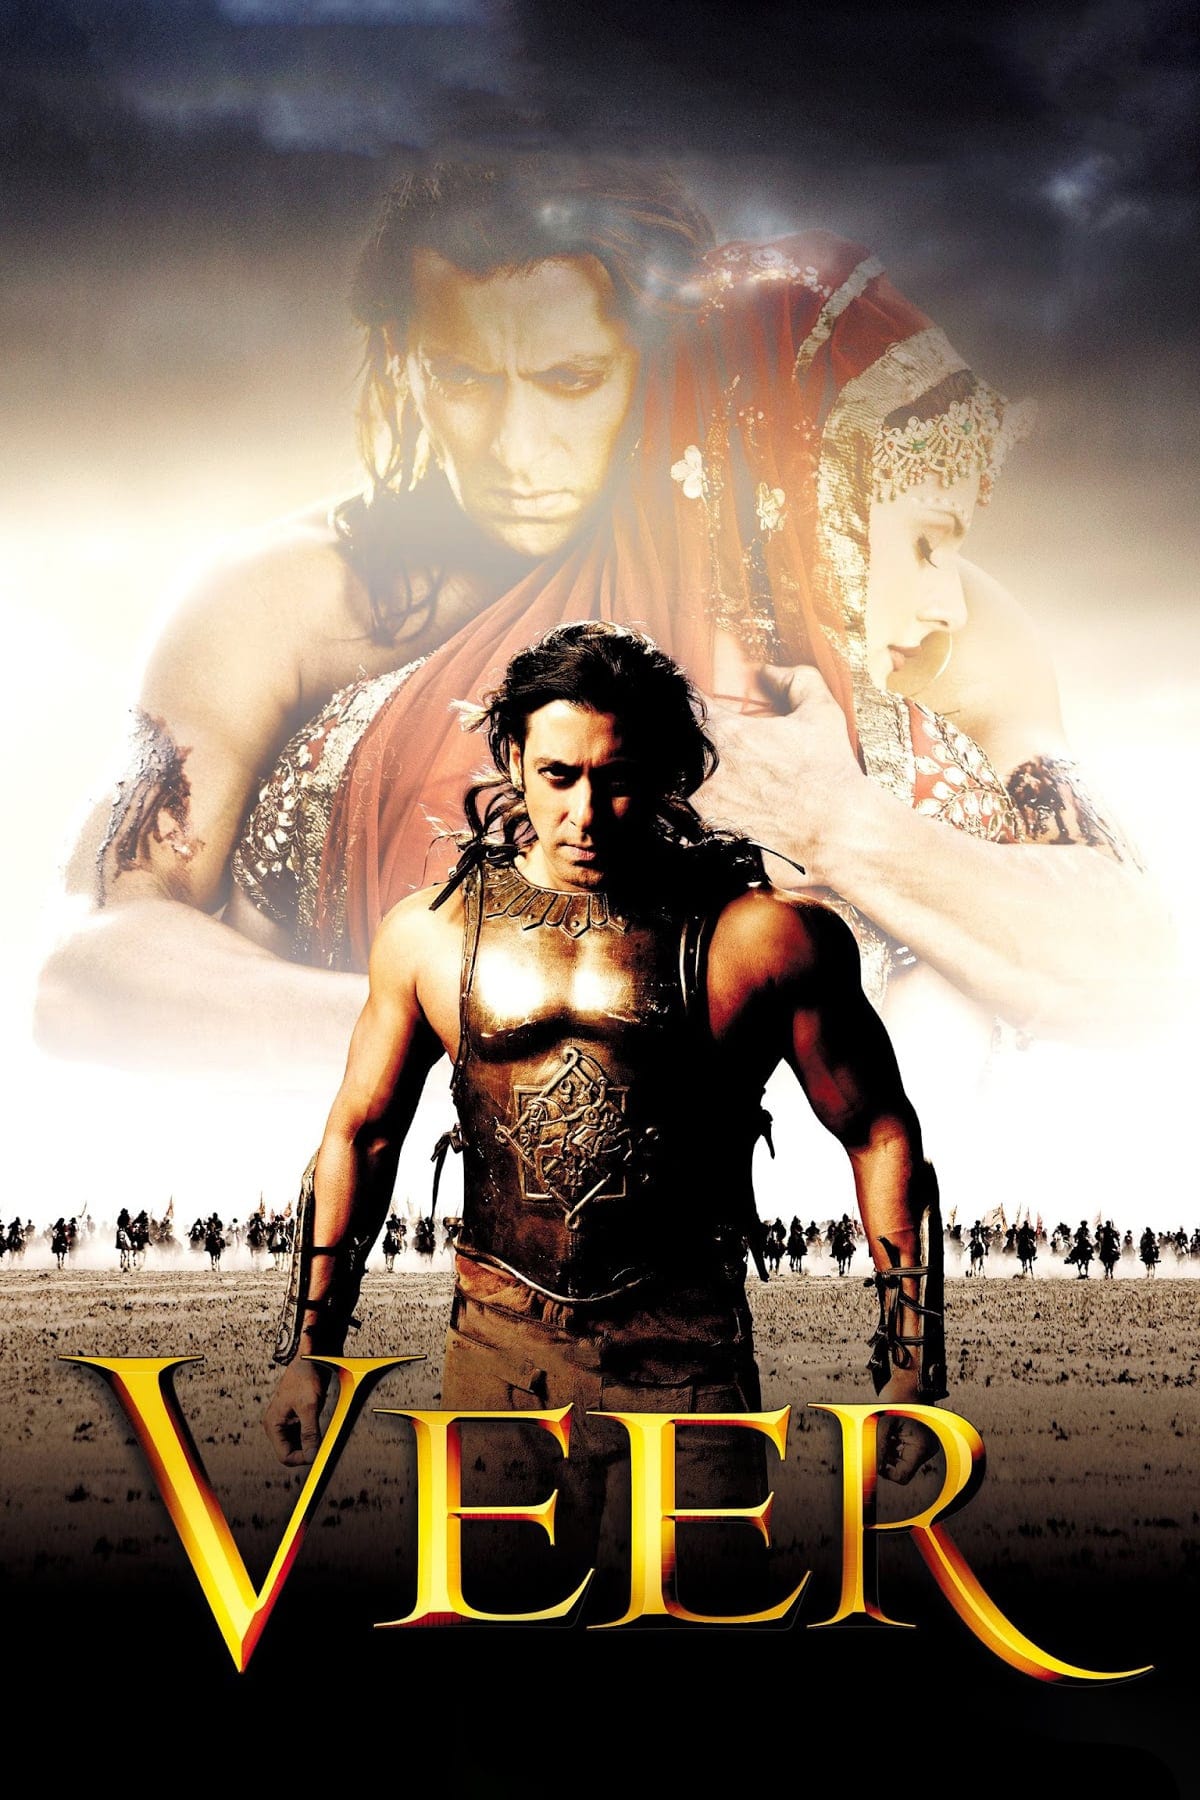 Poster for the movie "Veer"